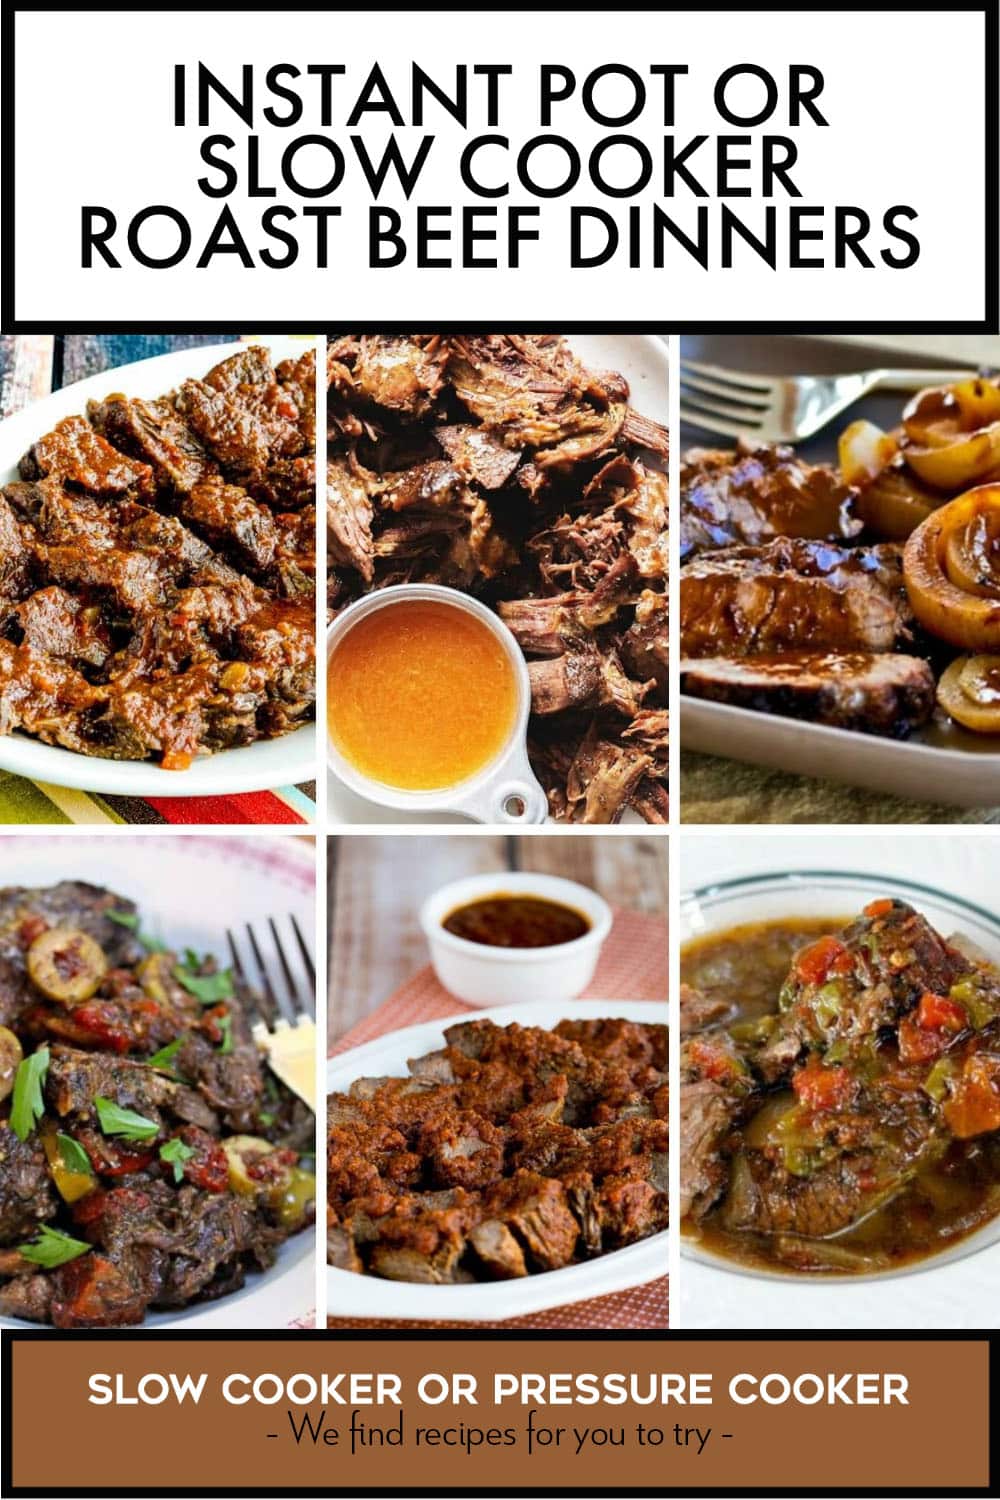 Pinterest image of Instant Pot or Slow Cooker Roast Beef Dinners